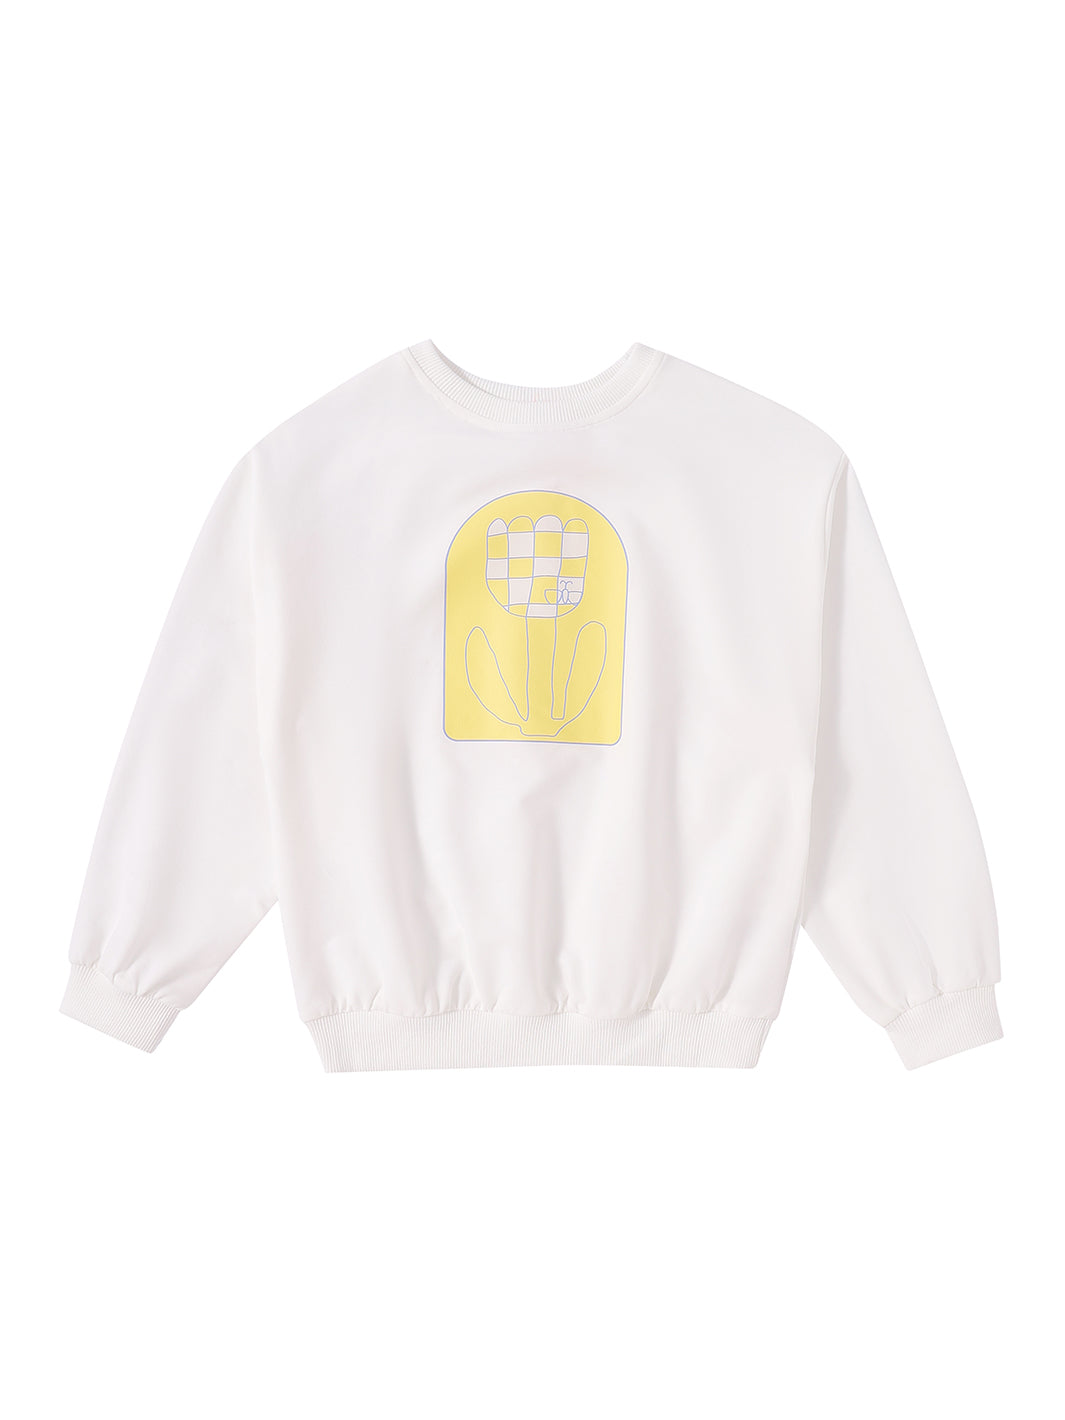 Checked Flower Print Top - White/Yellow